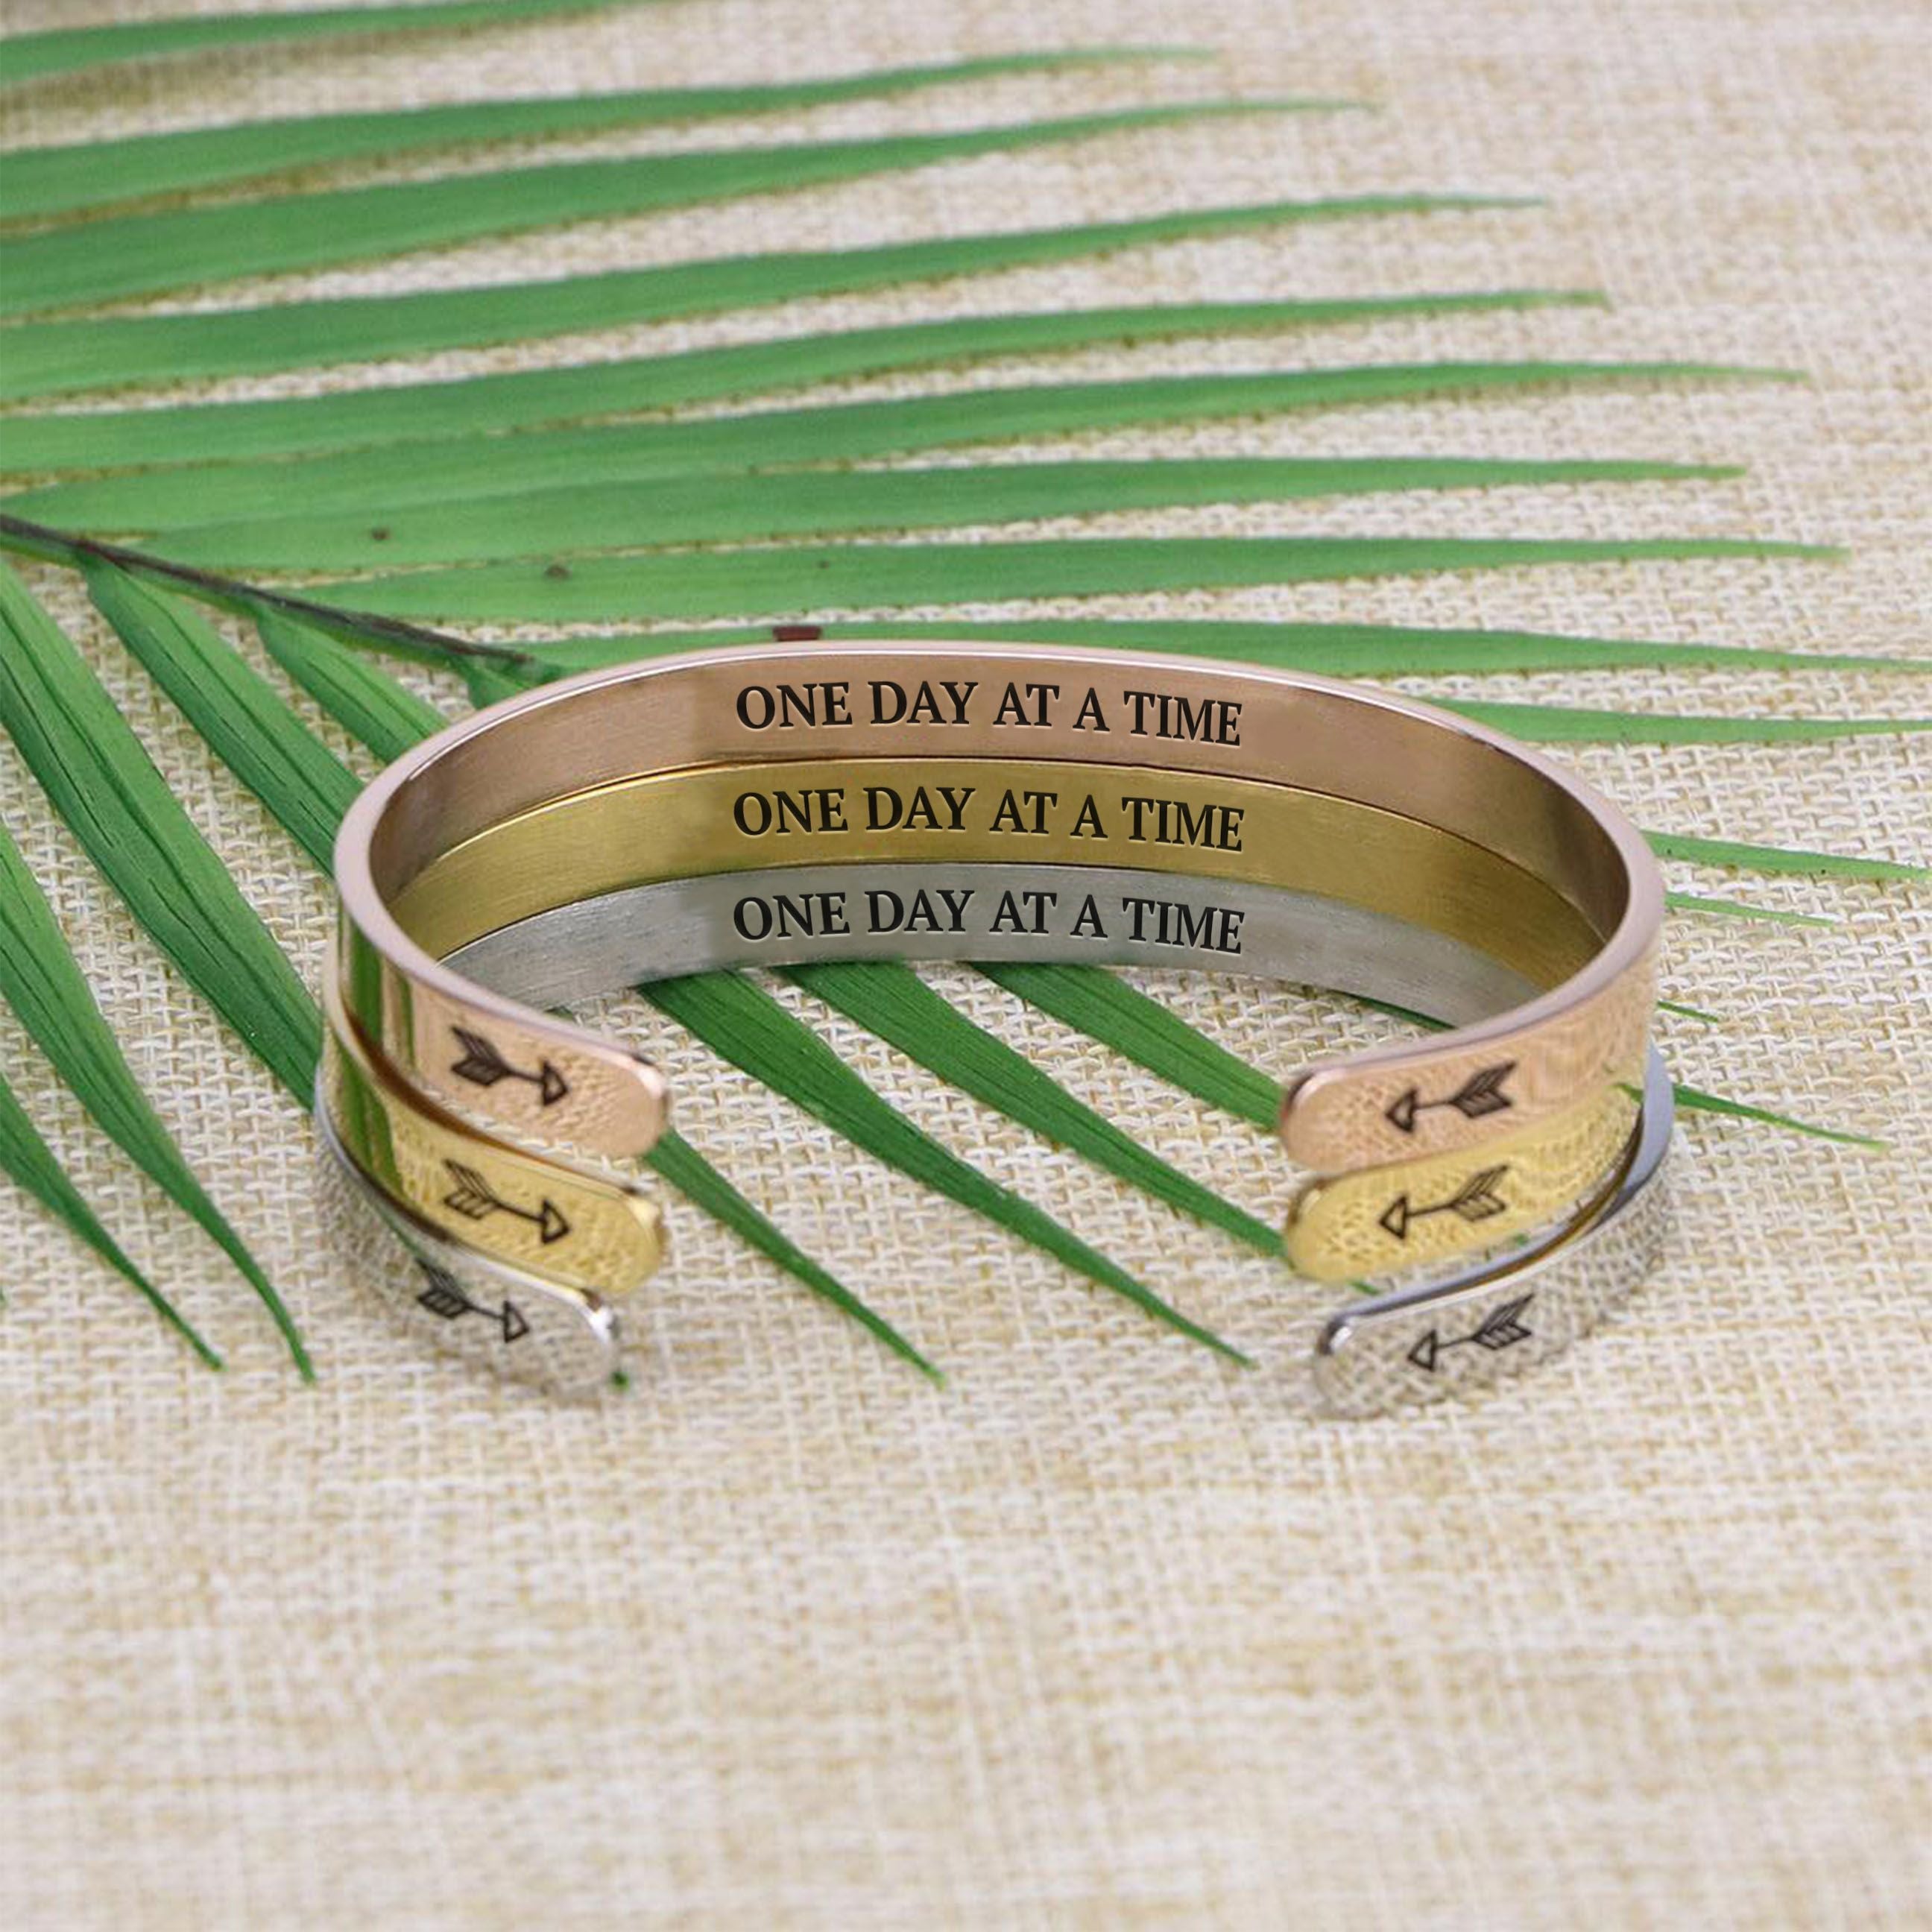 One day at a time bracelets with silver, gold, and rose gold plating stacked on a burlap surface with a leafy background